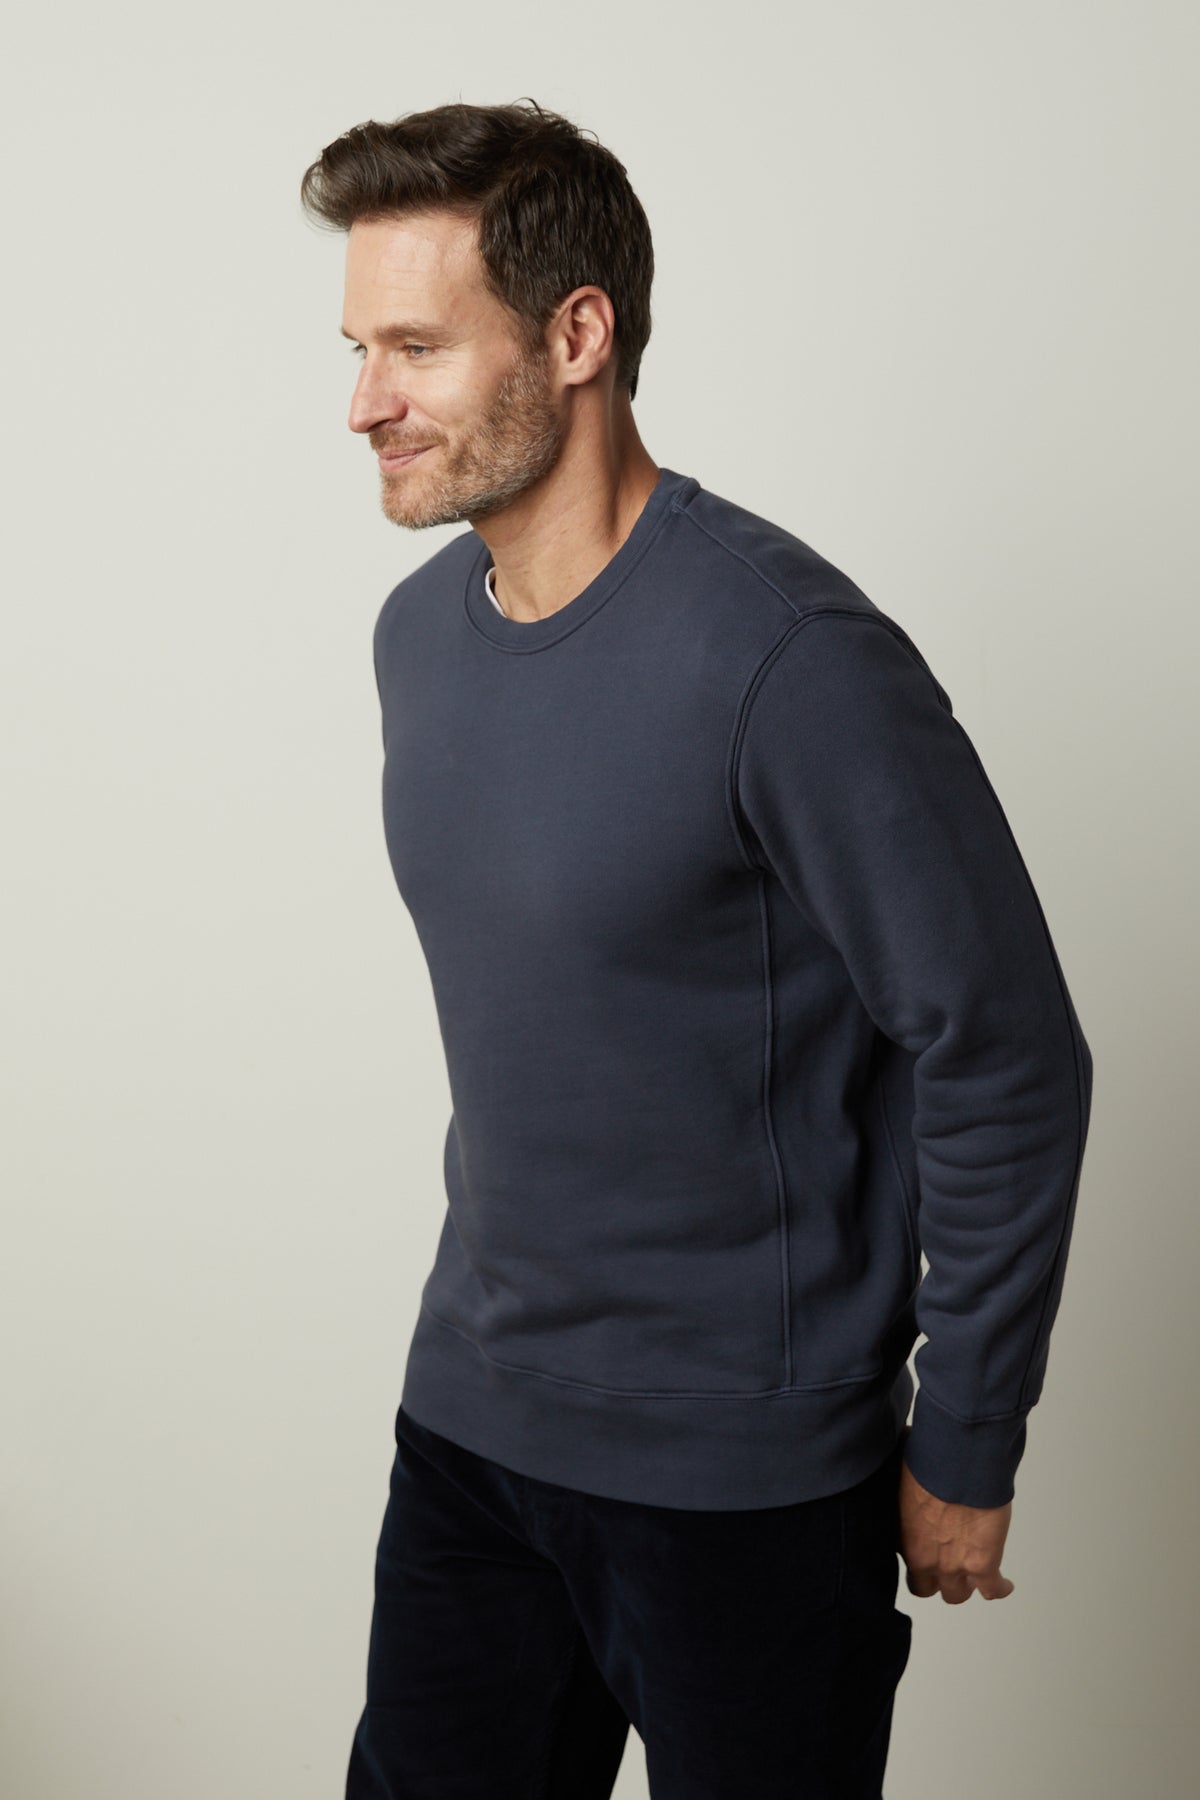   A man wearing a Velvet by Graham & Spencer KING CREW NECK SWEATSHIRT and pants. 